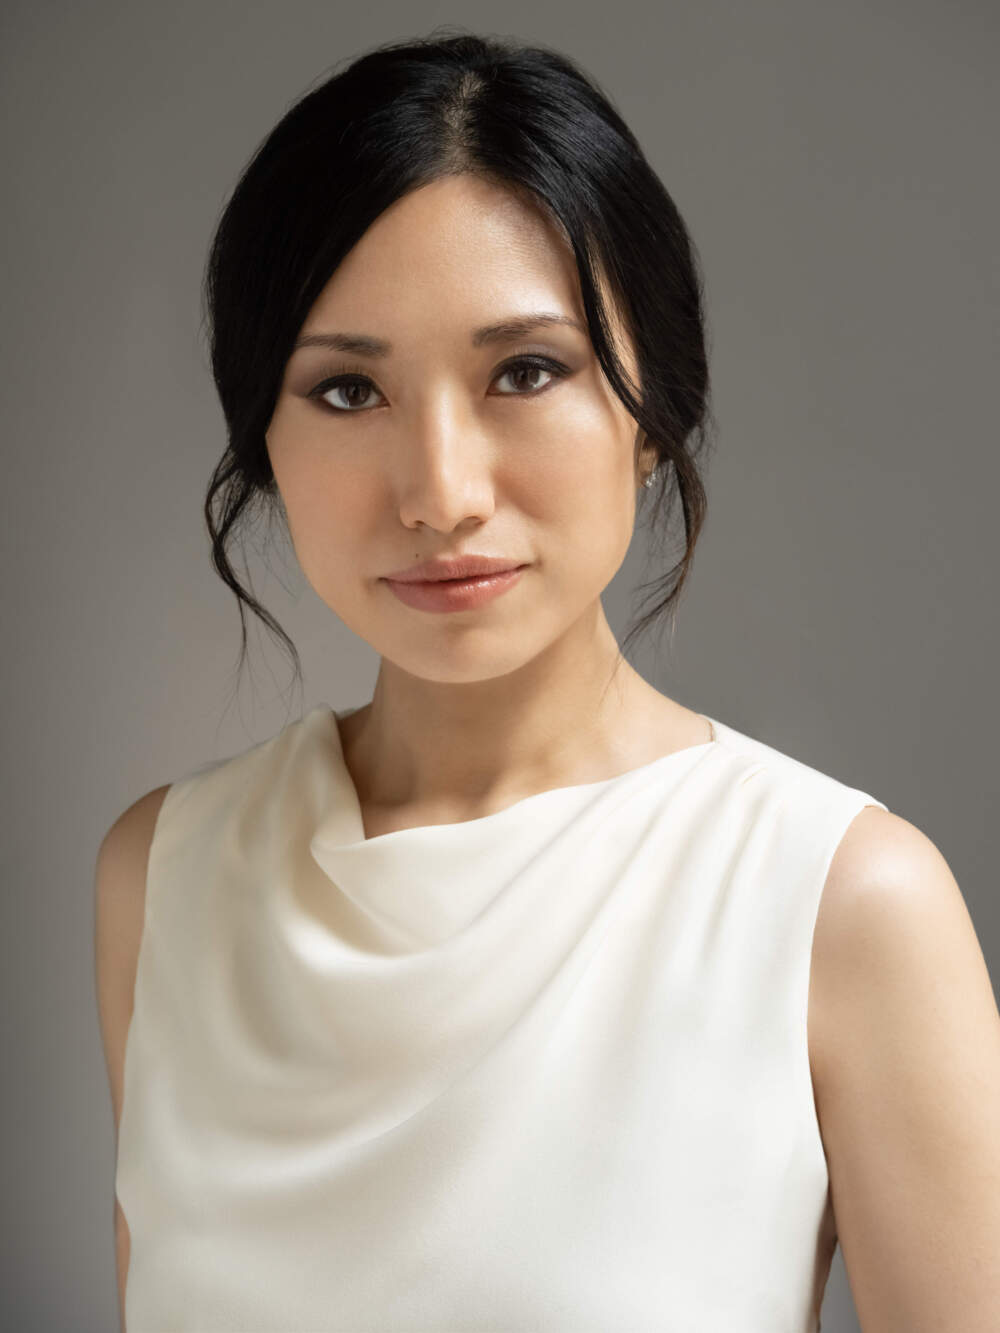 Author Carrie Sun. (Courtesy of Beowulf Sheehan)